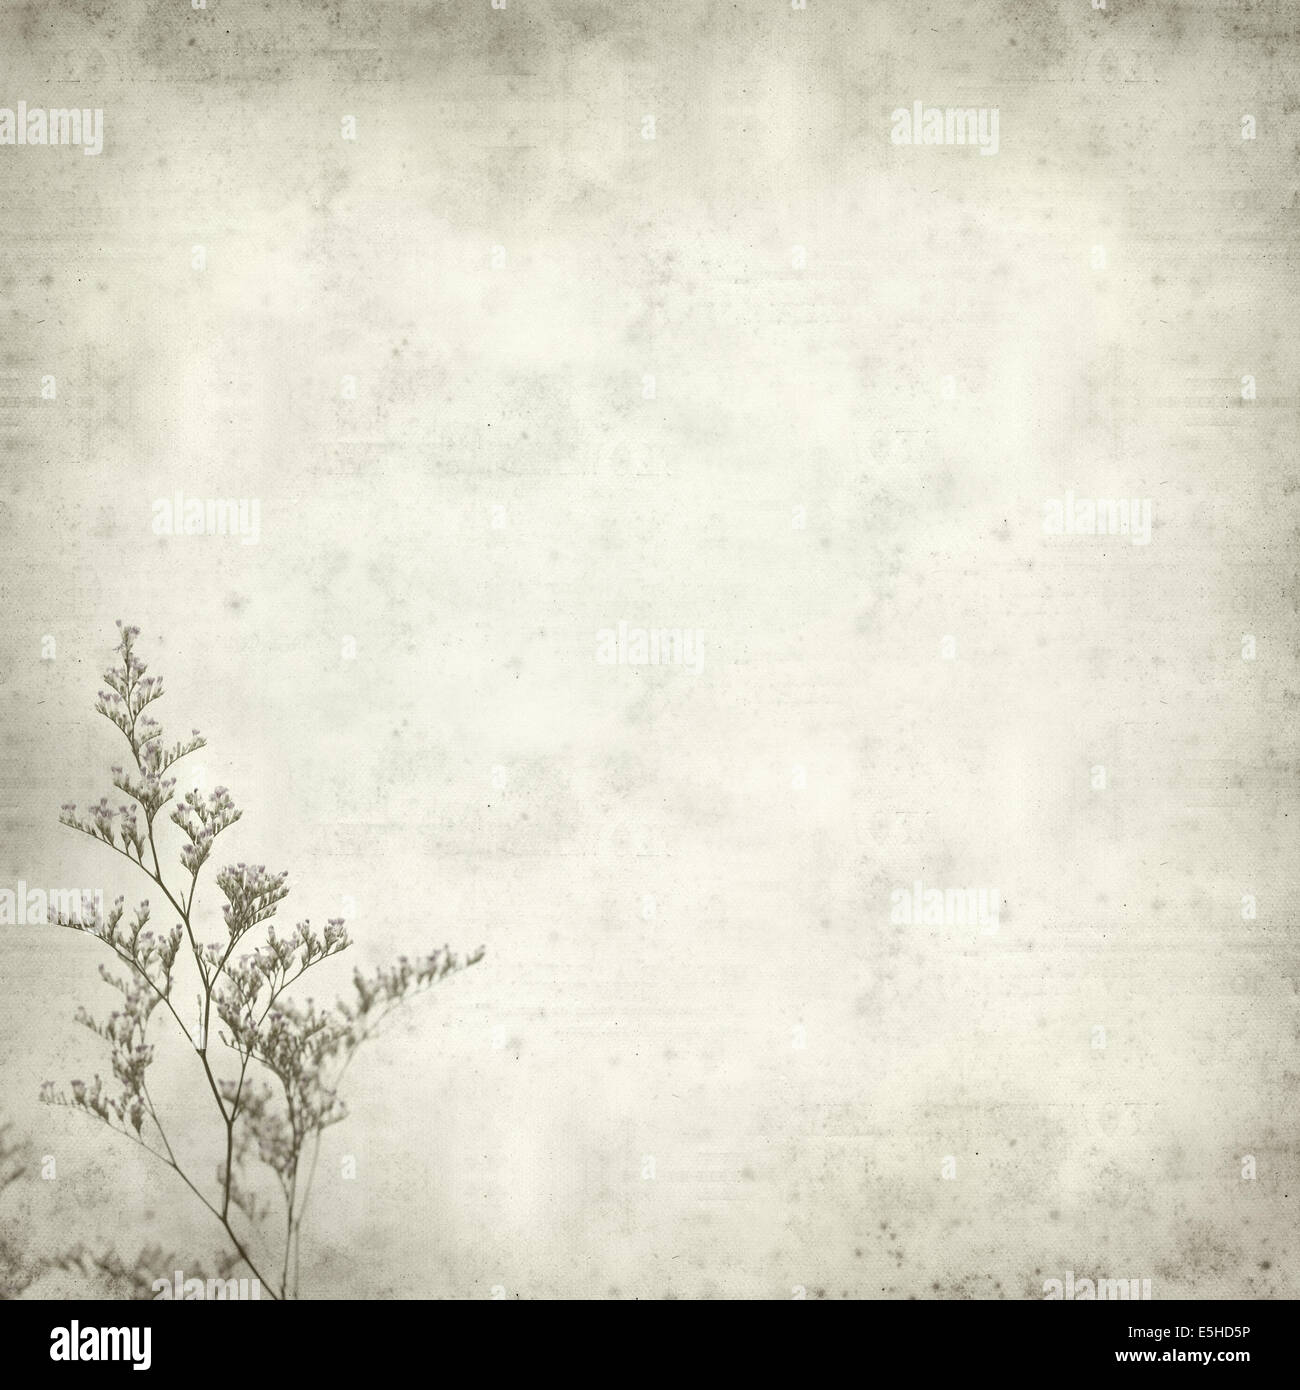 textured old paper background with tiny purple limonium  flowers Stock Photo